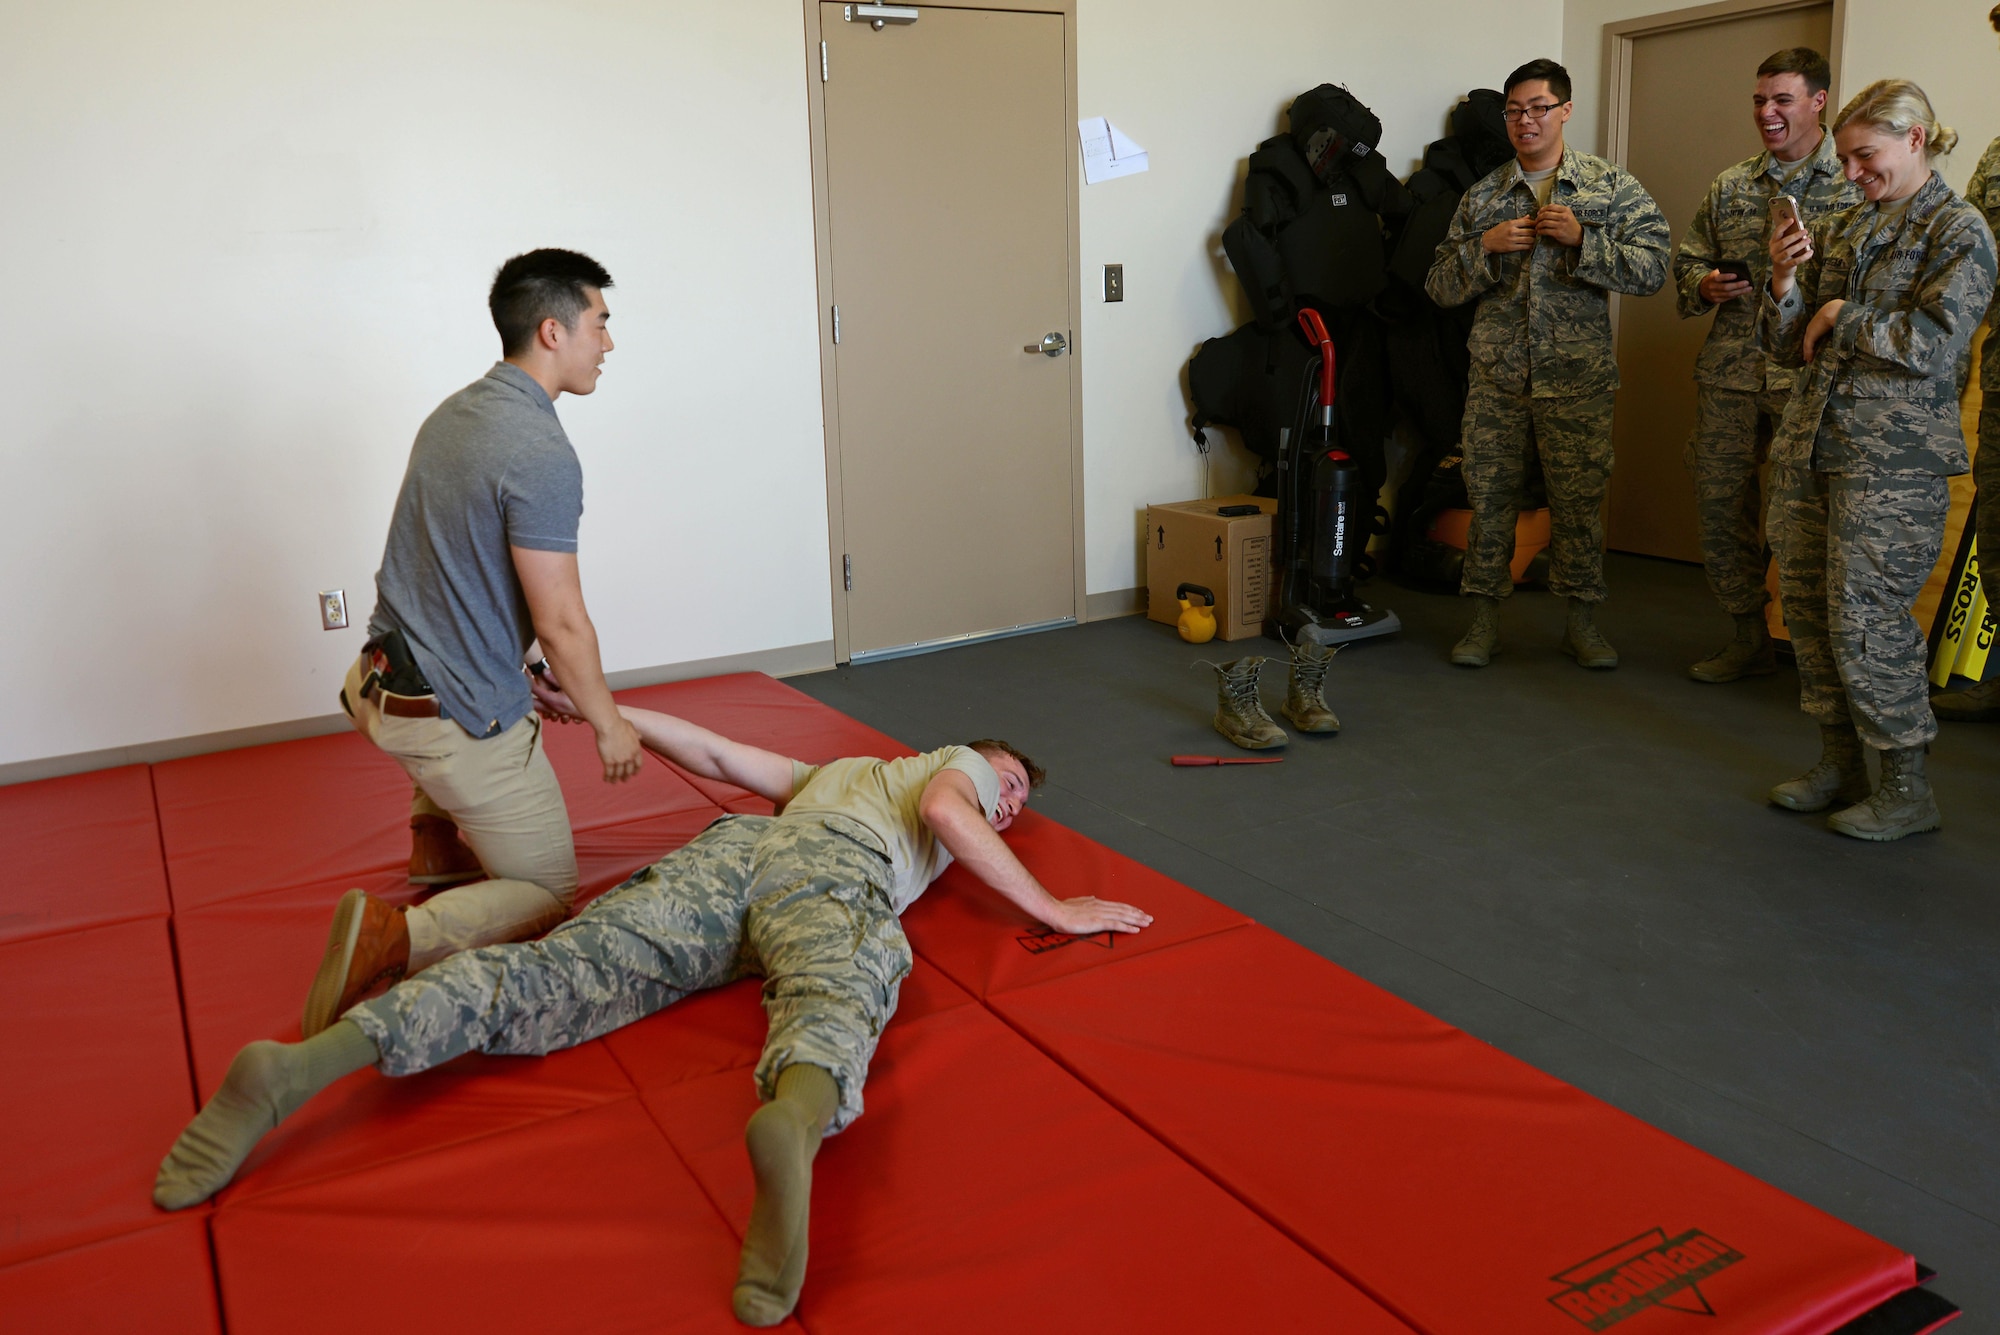 U.S. Air Force Special Agent James Min from the Office of Special Investigations Detachment 212 holds Cadet 2nd Class Parker Rosedahl, U.S. Air Force Academy cadet, on a mat at Shaw Air Force Base, S.C., June 9, 2017. Min demonstrated a take-down technique to cadets during their visit as part of the Operation Air Force program. (U.S. Air Force Airman 1st Class Kathryn R.C. Reaves)